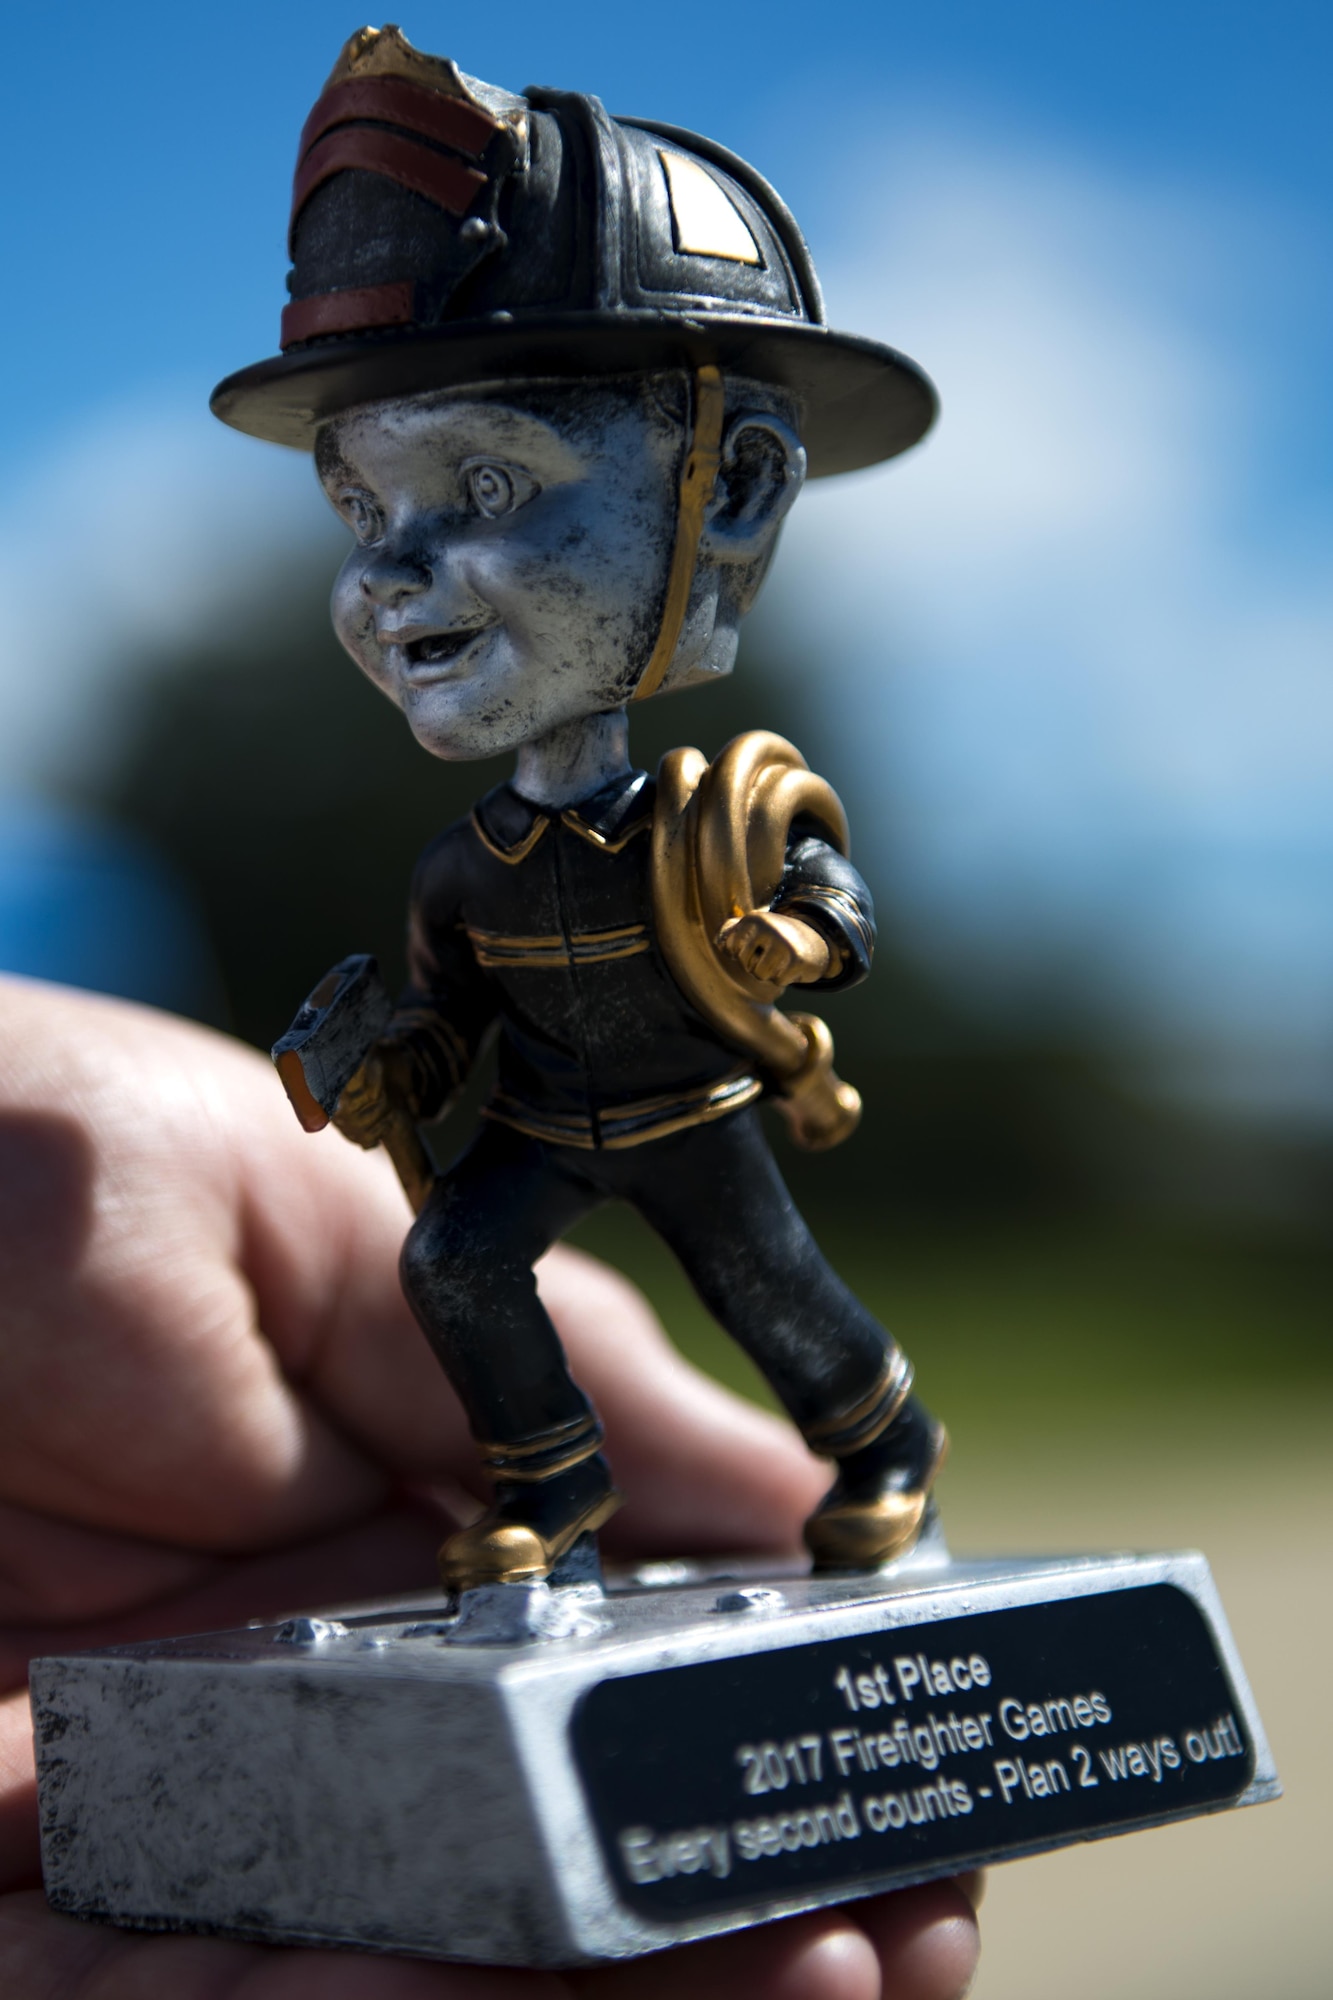 An event organizer assigned to the 23 Civil Engineer Squadron fire department displays a trophy during the 2017 Fire Prevention Week Fire Muster, Oct. 13, 2017, at Moody Air Force Base, Ga. The 23d CES fire department designed the muster to allow teams of Airmen to compete in several events, ranging from a hose roll to a fire truck pull. Event organizers wanted Airmen to experience being a firefighter in a way that got people active. (U.S. Air Force photo by Airman 1st Class Erick Requadt)